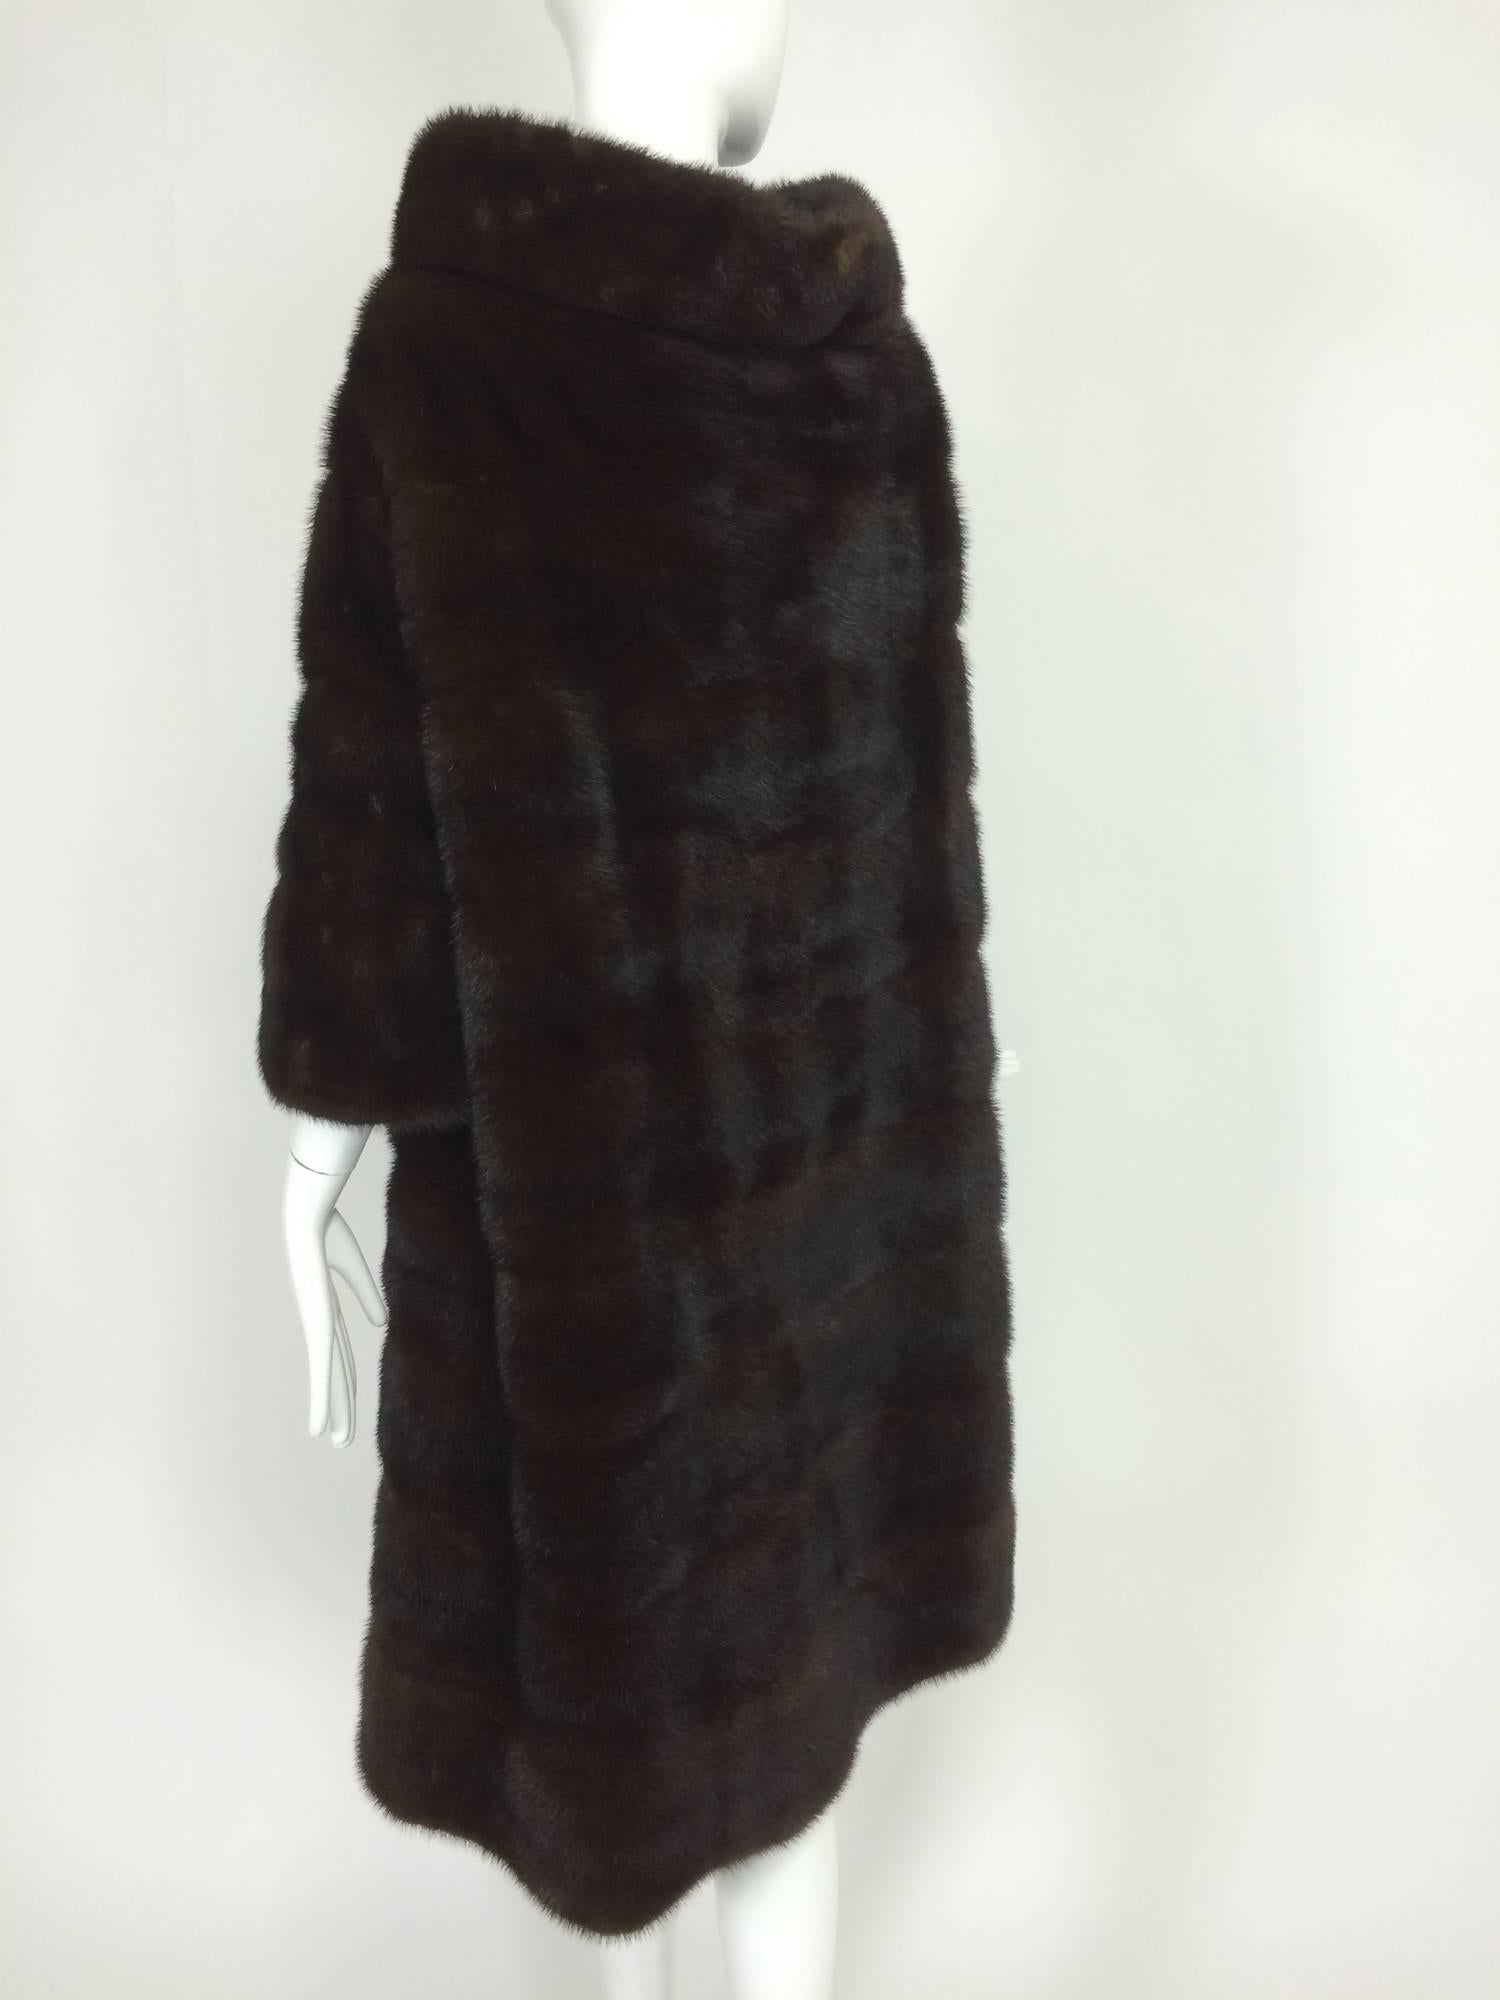 Glossy dark mink portrait collar fur coat early 1960s...Fabulous coat from the early 1960s...The fur is pieced horizontally which gives it a unique look...The portrait collar is meant to frame the face...Bracelet length sleeves are perfect when worn